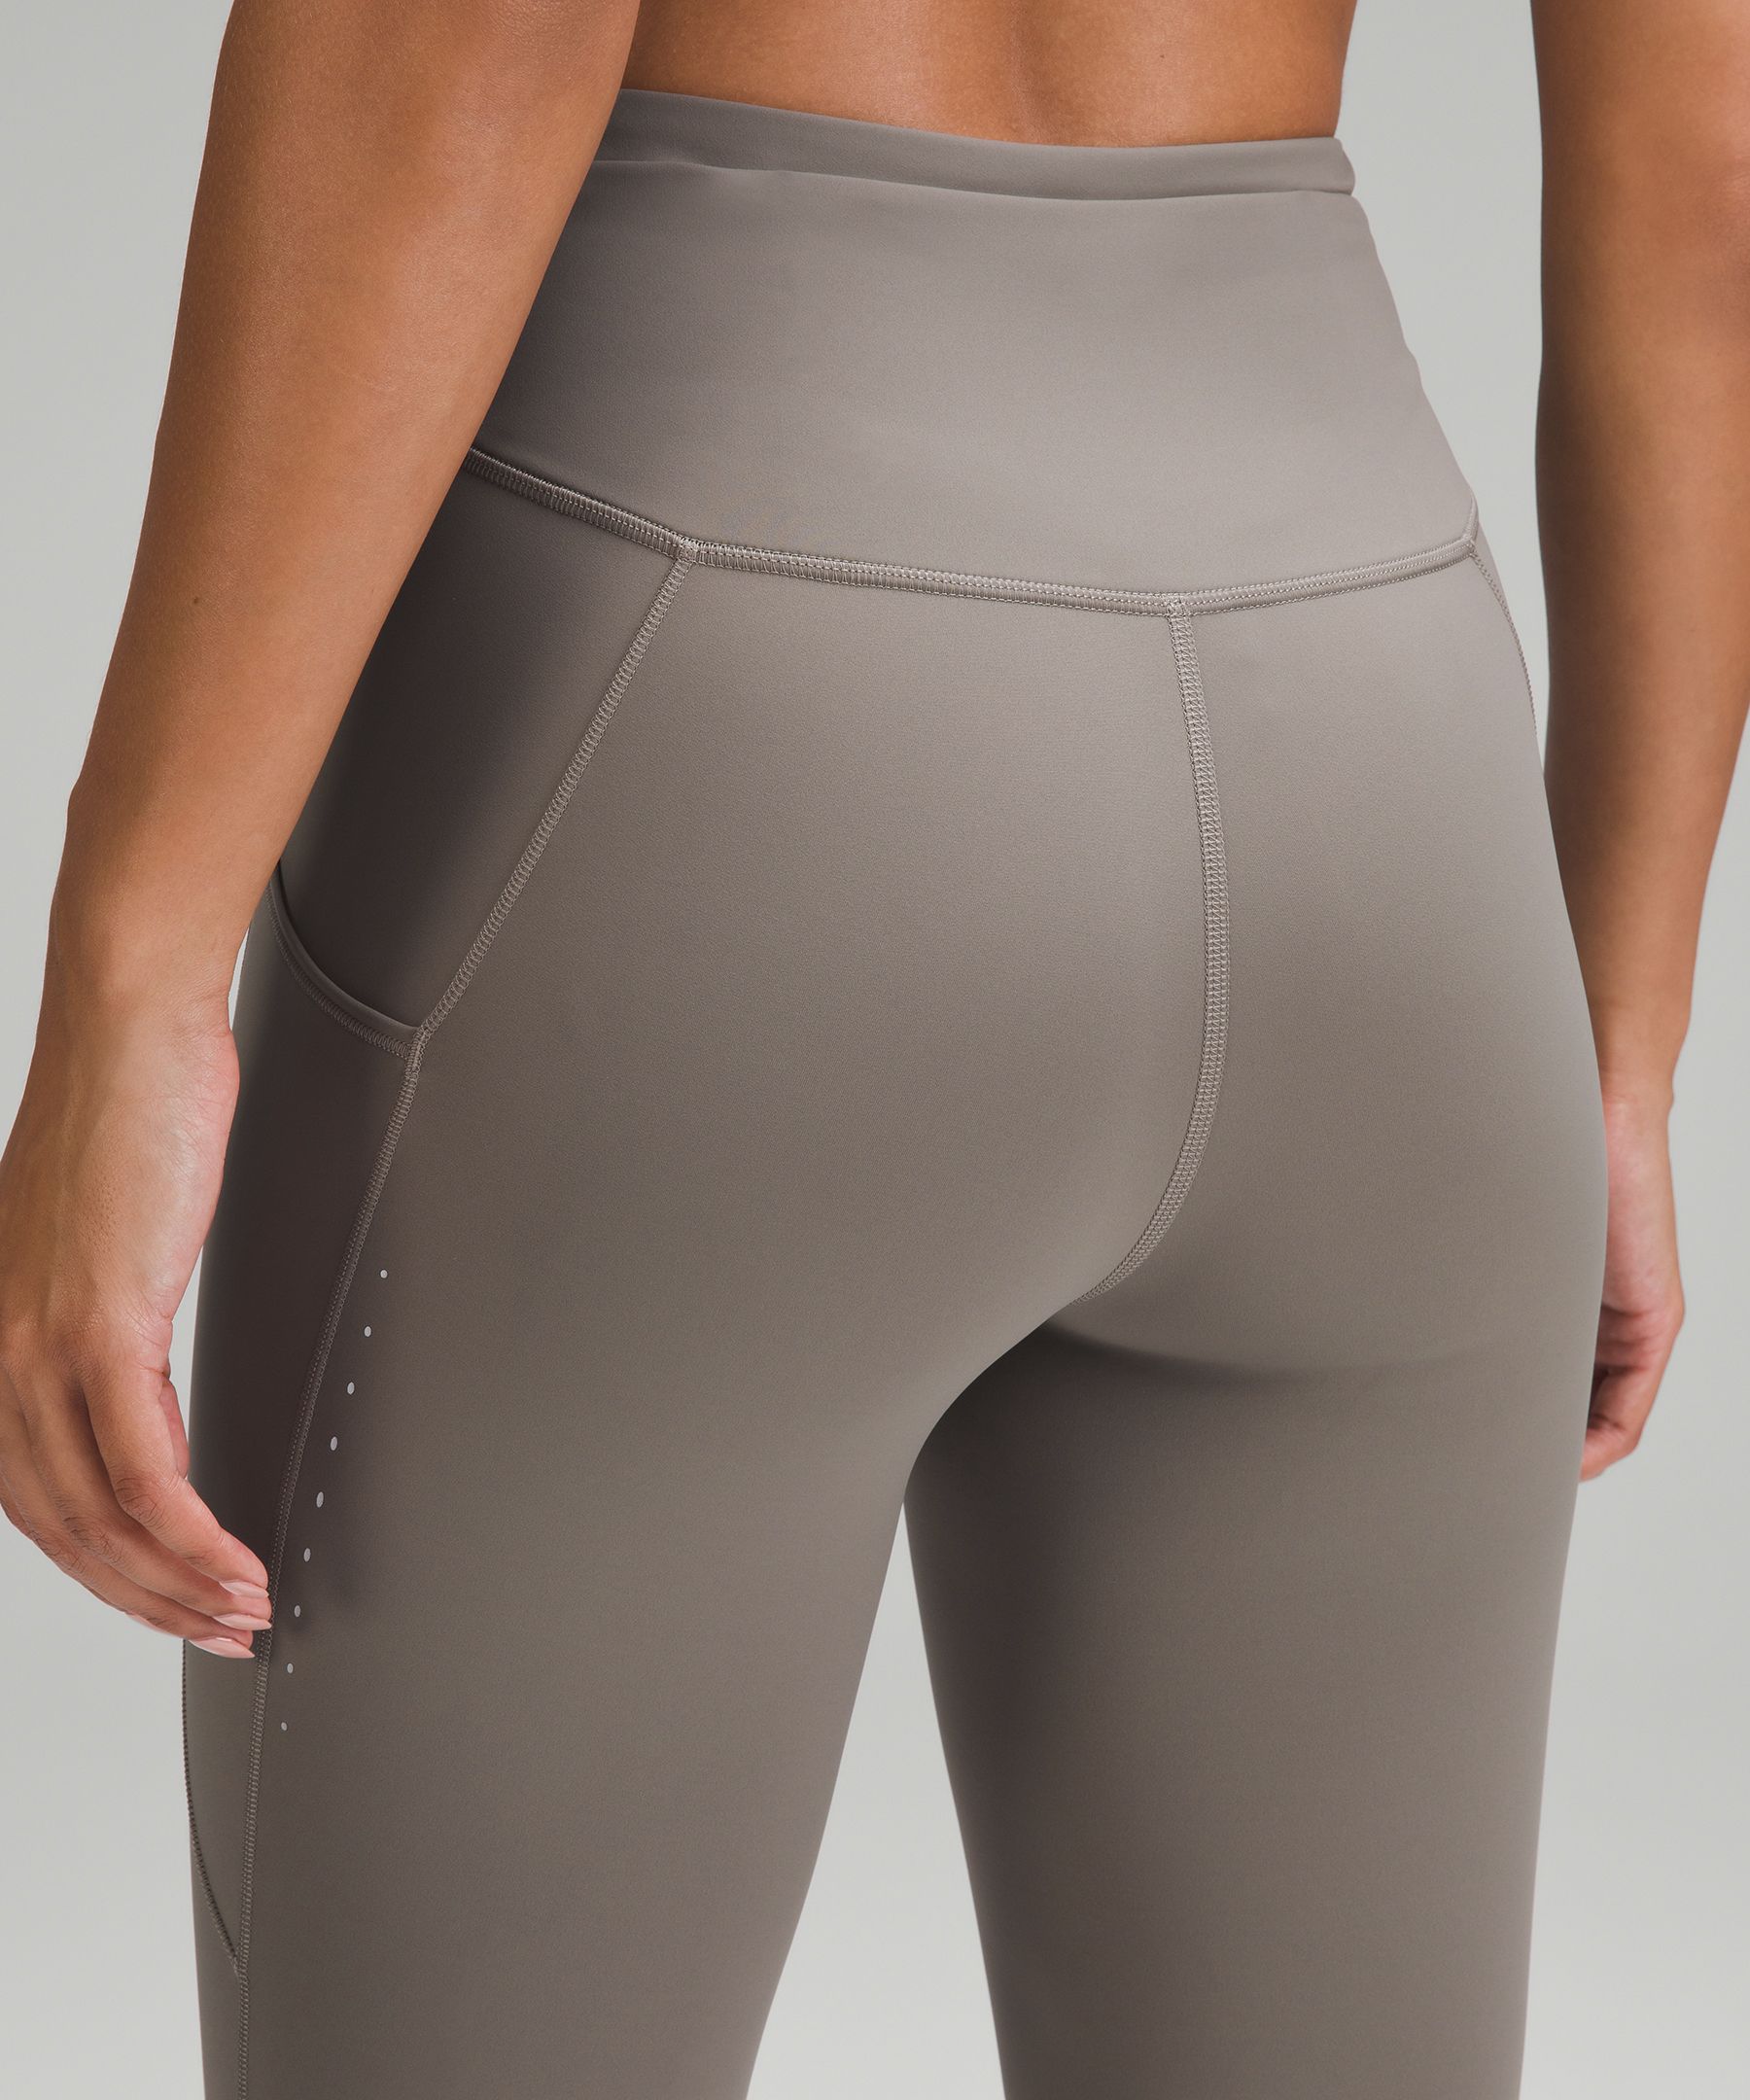 lululemon athletica Fast And Free High-rise Leggings 25 Pockets in Gray